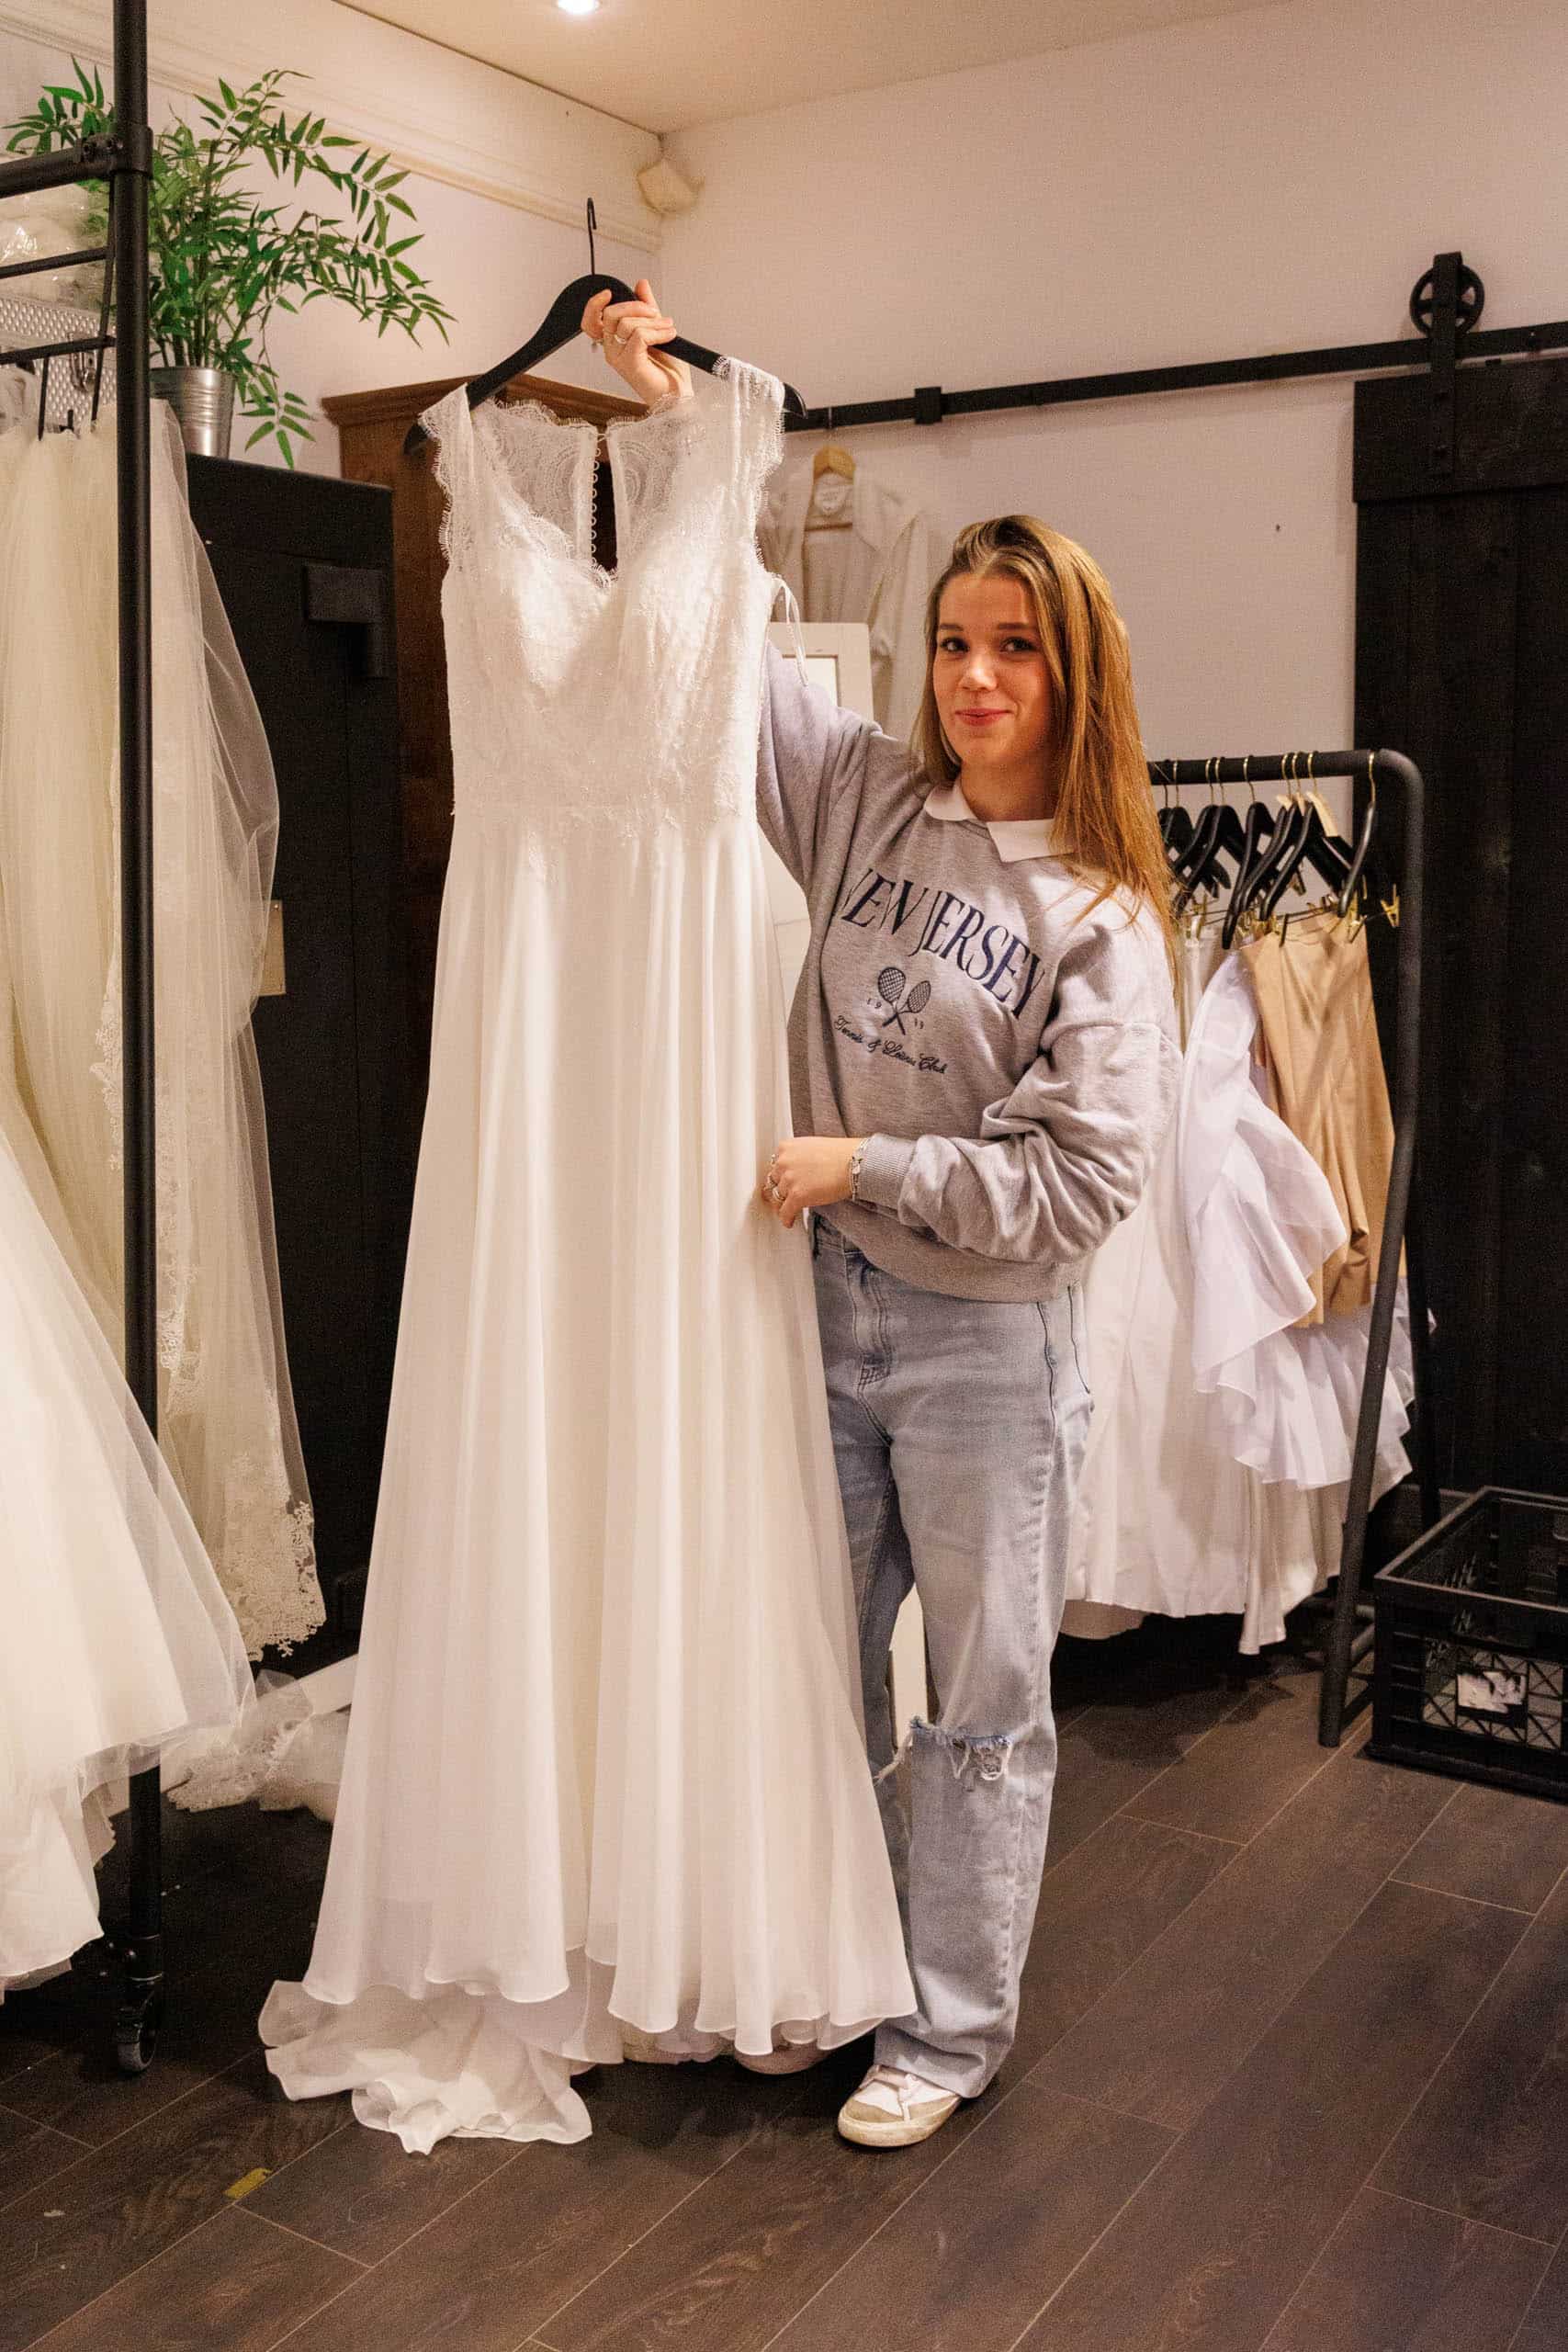 A woman playfully trying on wedding dresses in a shop.